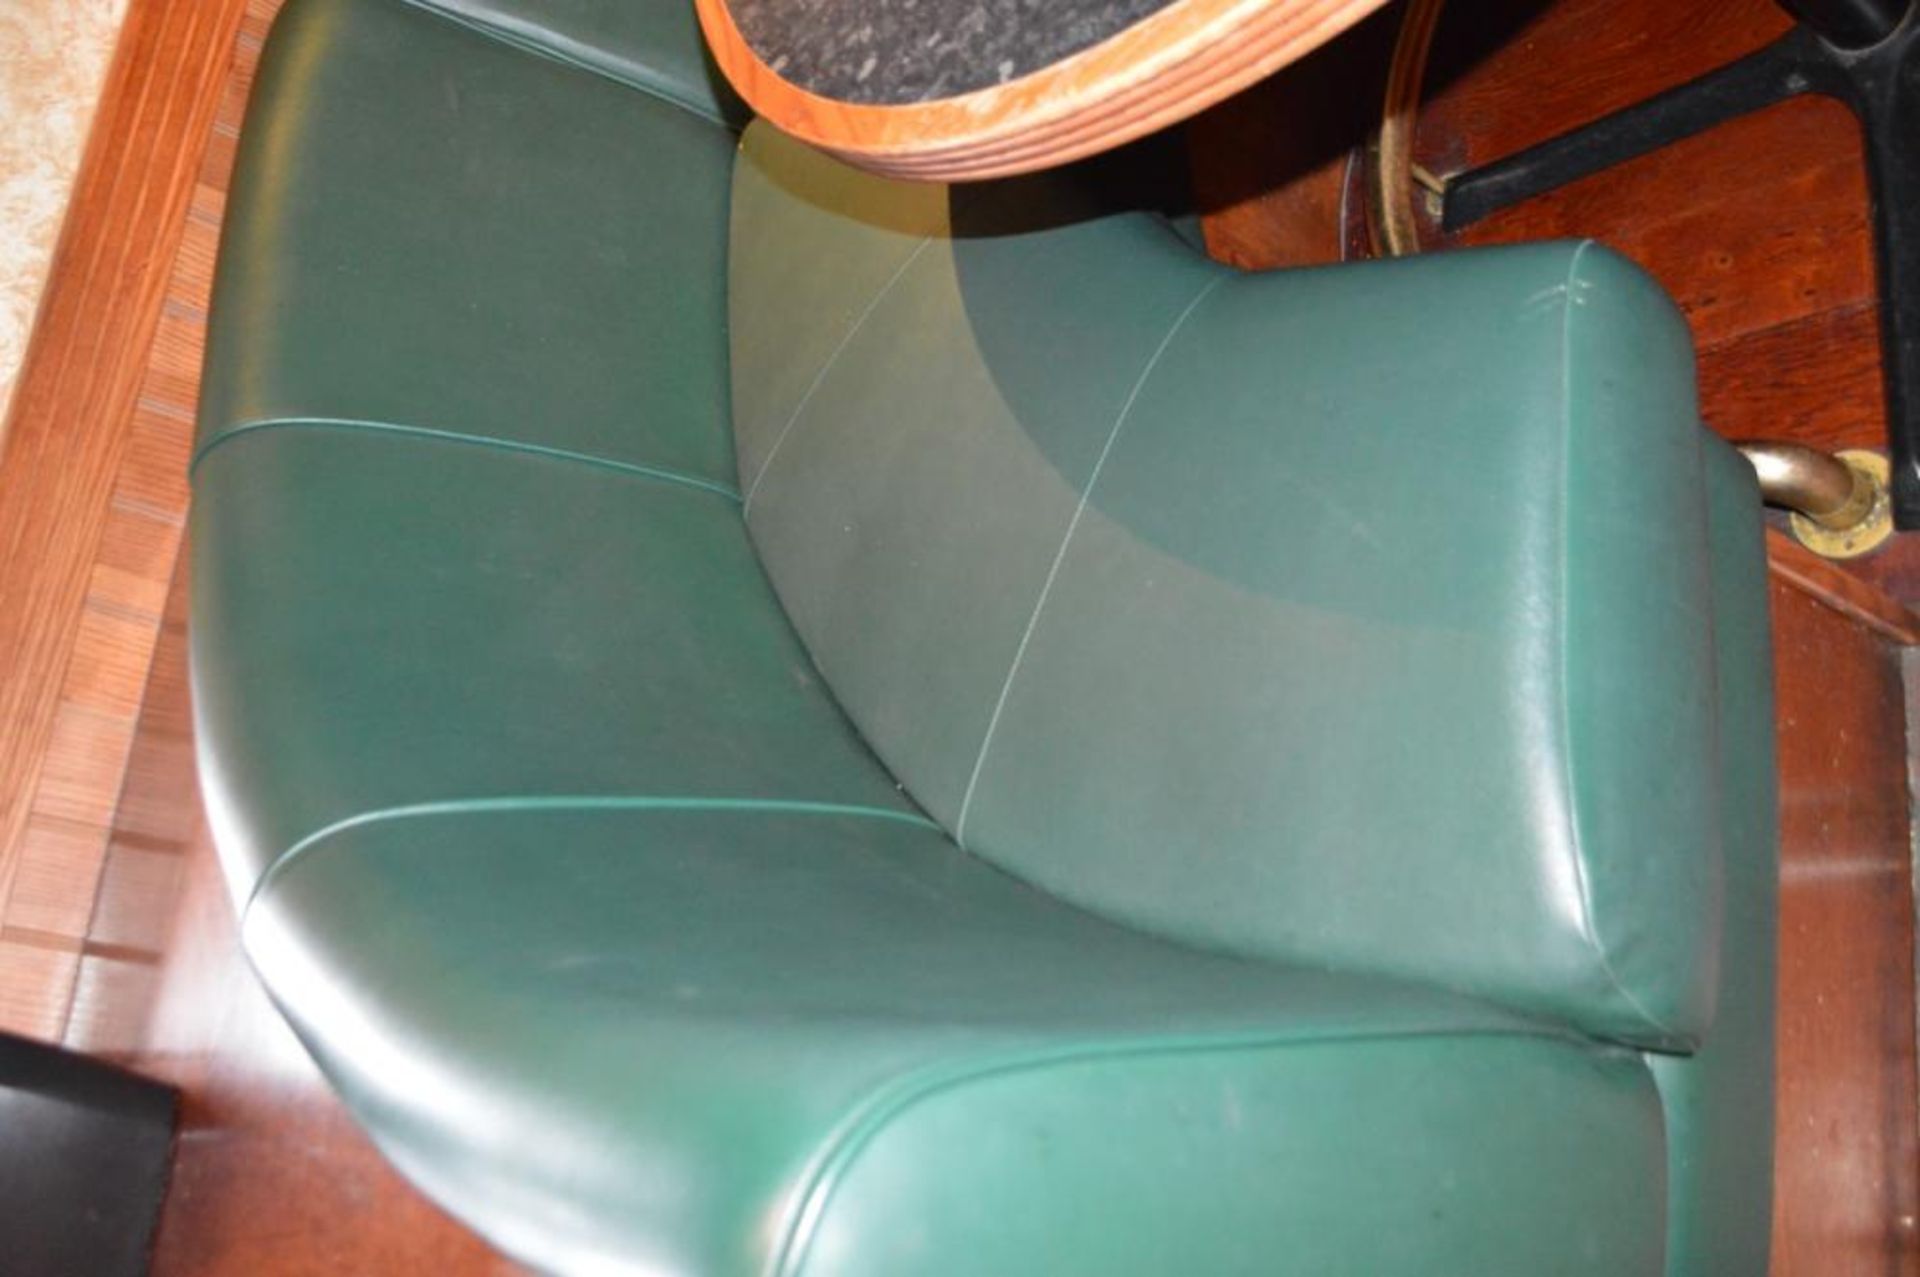 1 x Contemporary U Seating Booth With Green Faux Leather Upholstery and Brass Foot Rest - H105 x W22 - Image 4 of 5